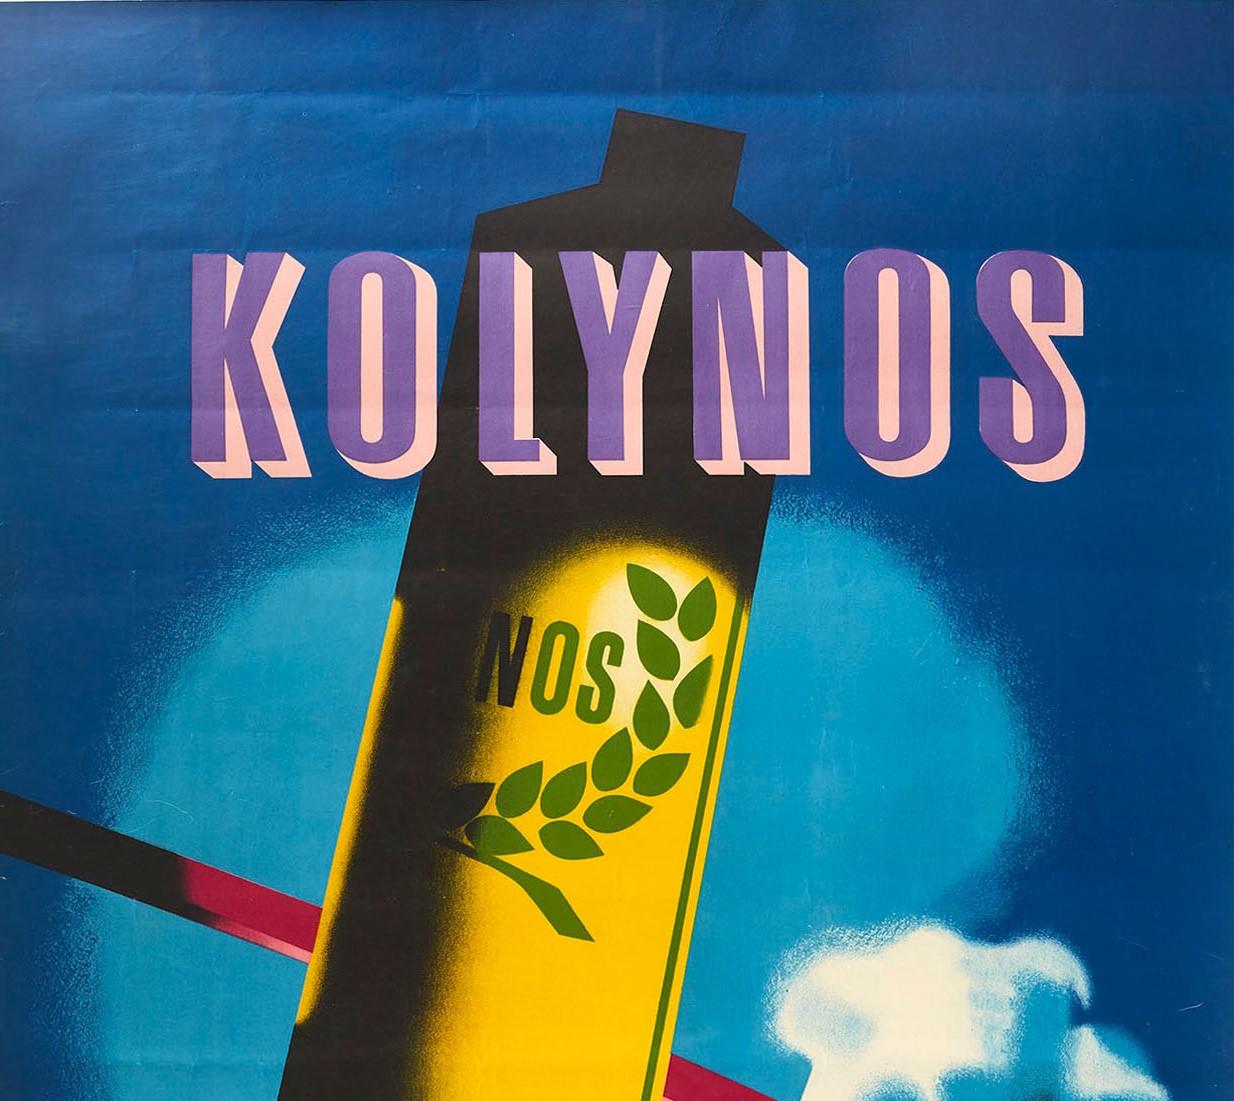 Original vintage dental health advertising poster for Kolynos toothpaste featuring a great modernist design of a toothbrush and tube of toothpaste against a blue background with the bold purple lettering above. Created by an American dentist Newell